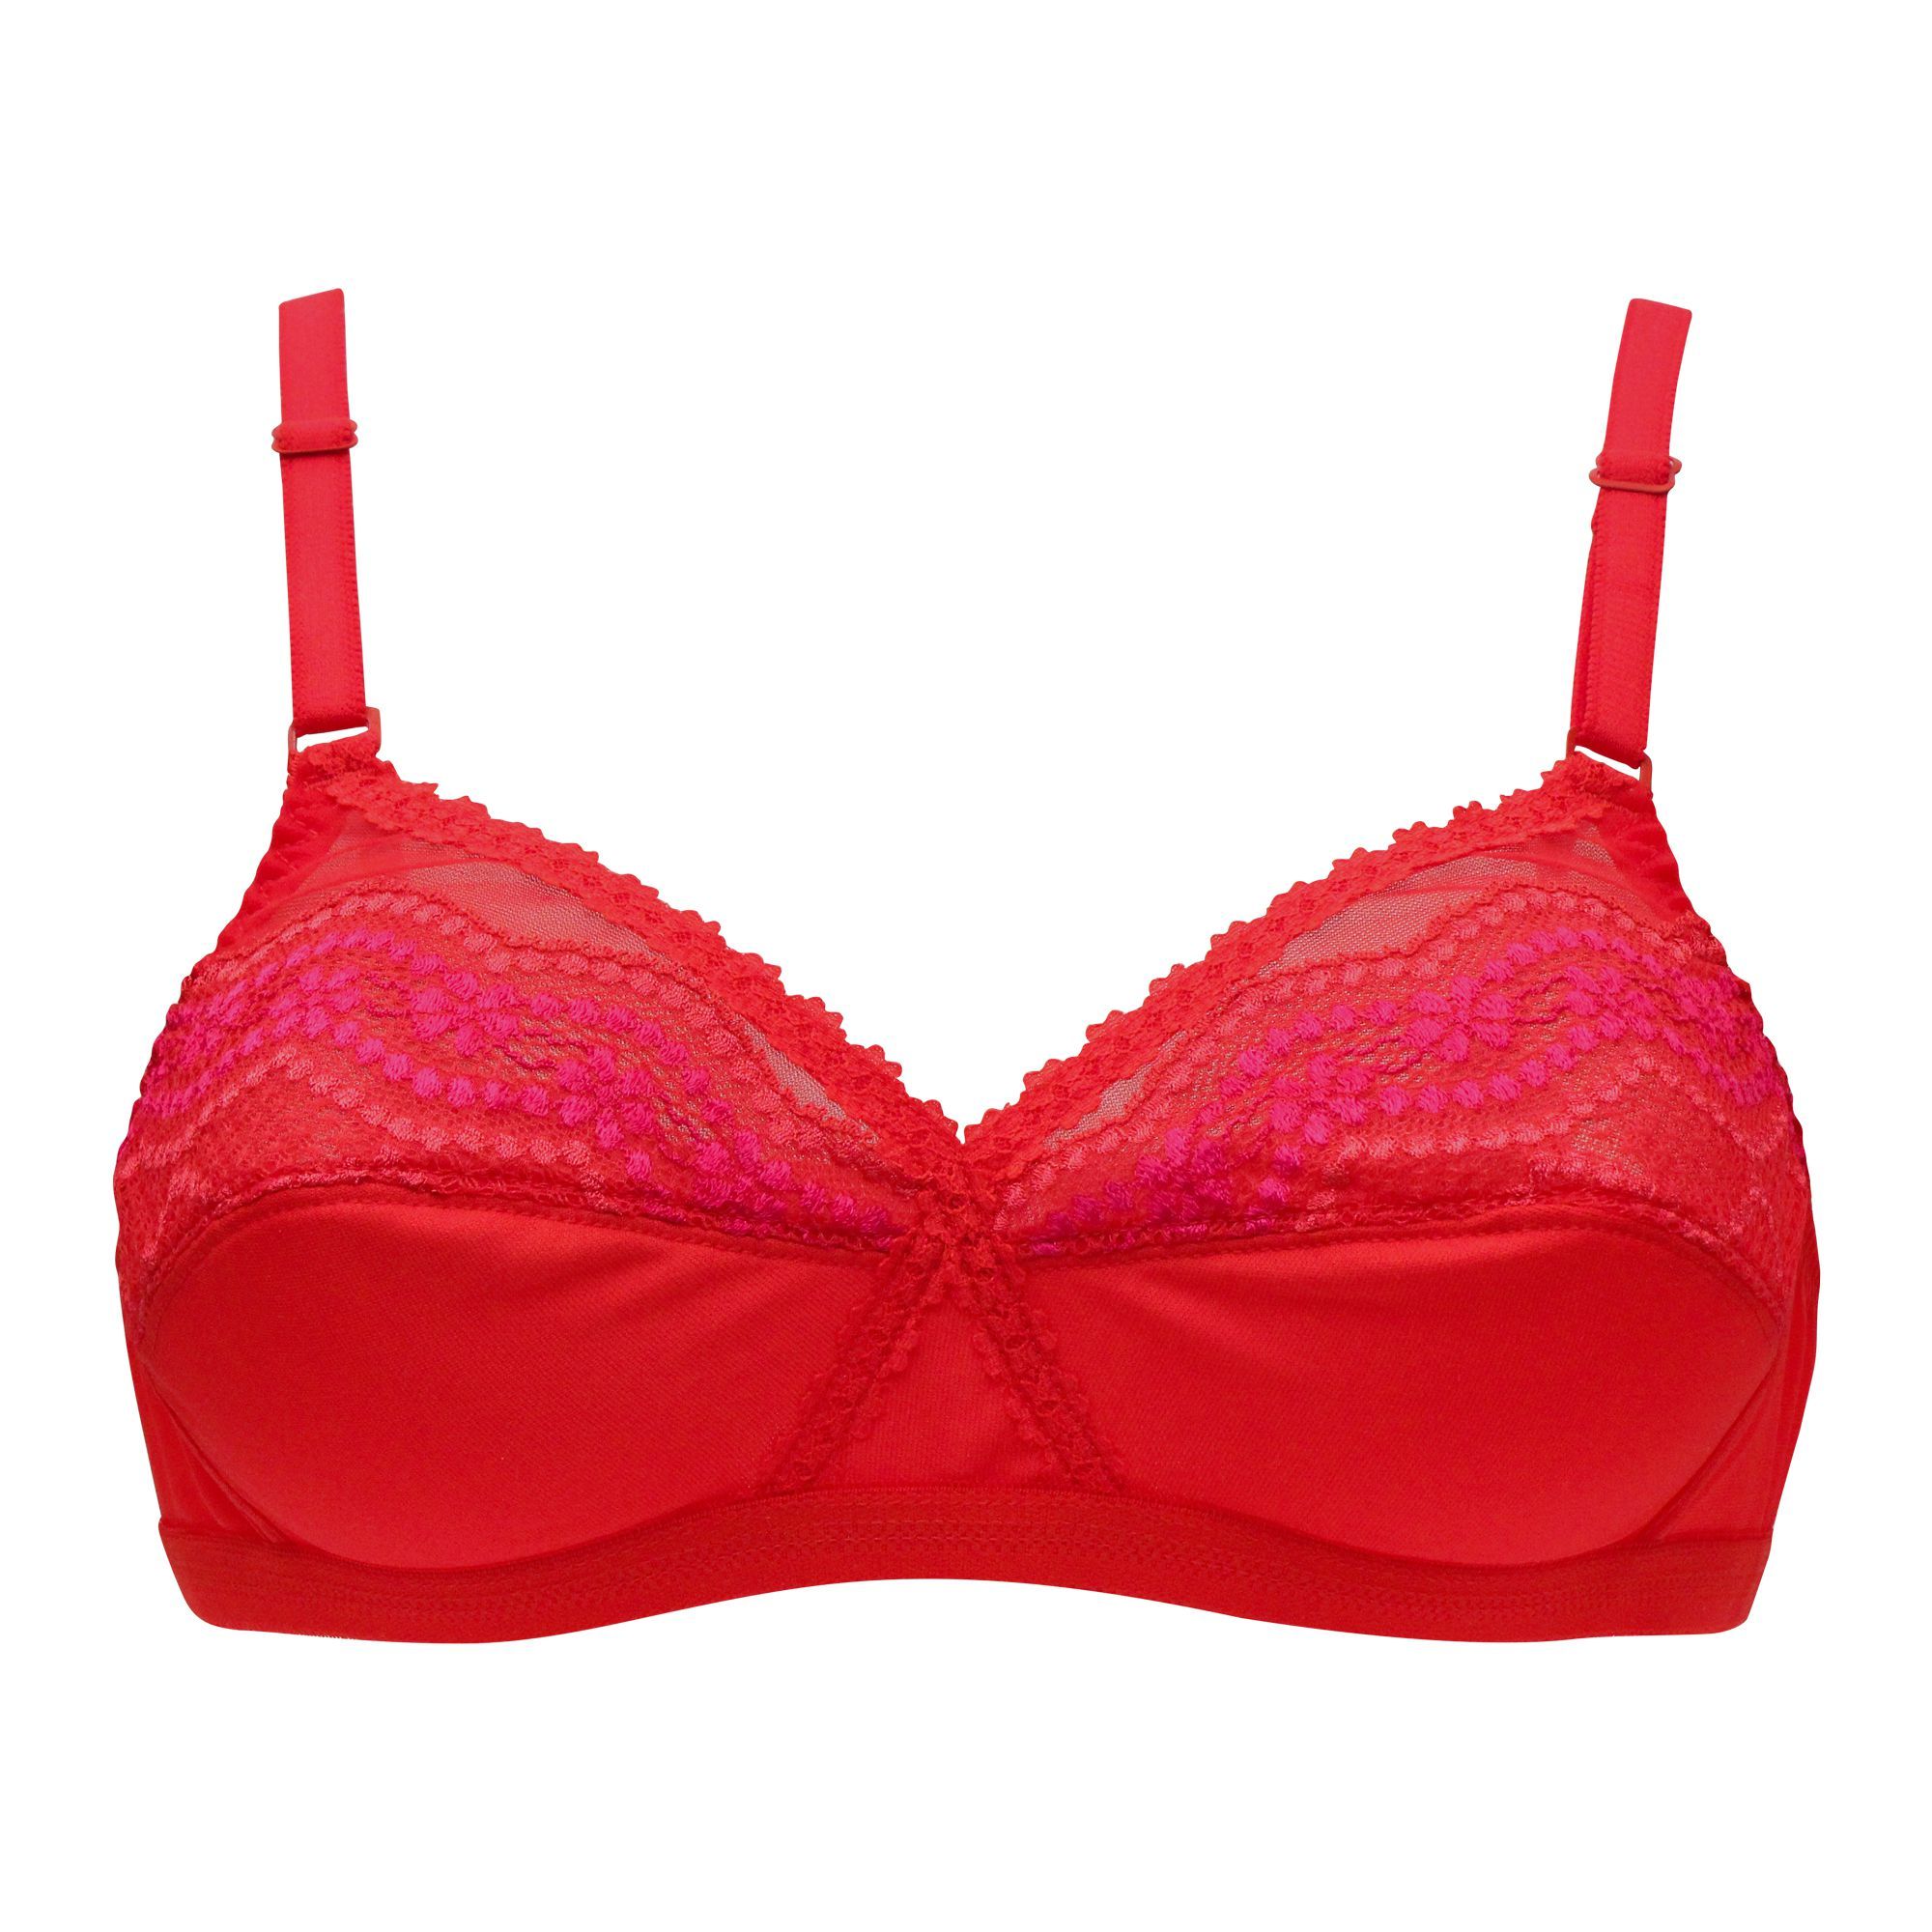 Purchase IFG Mystique N Bra, Red Online at Special Price in